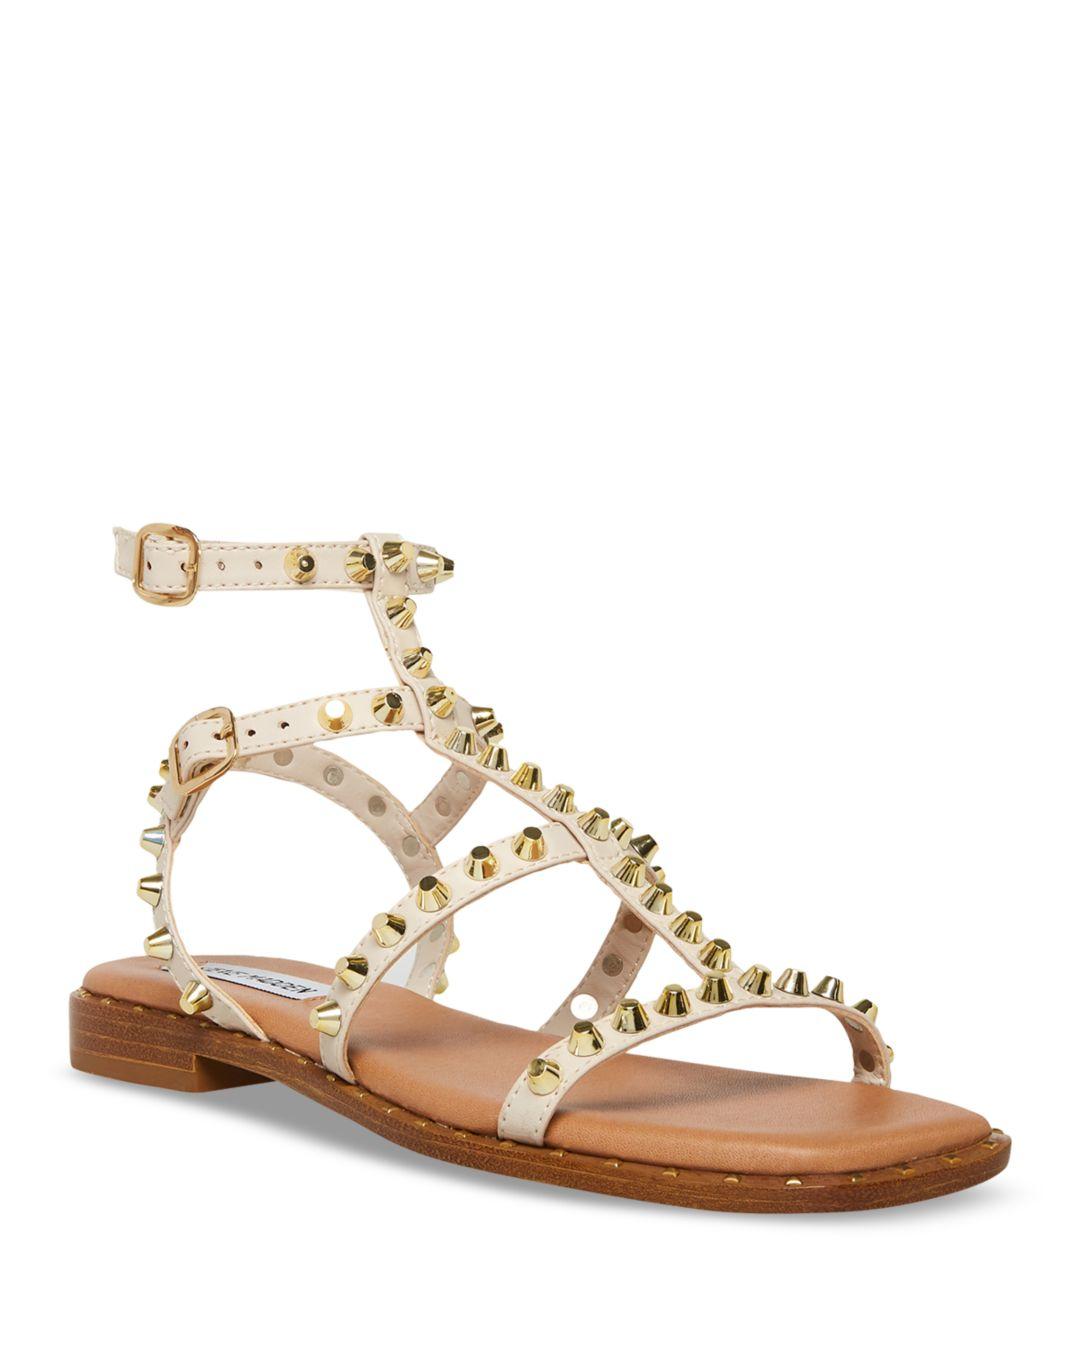 Steve Madden Sunnie Square Toe Studded Gladiator Sandals in Natural | Lyst